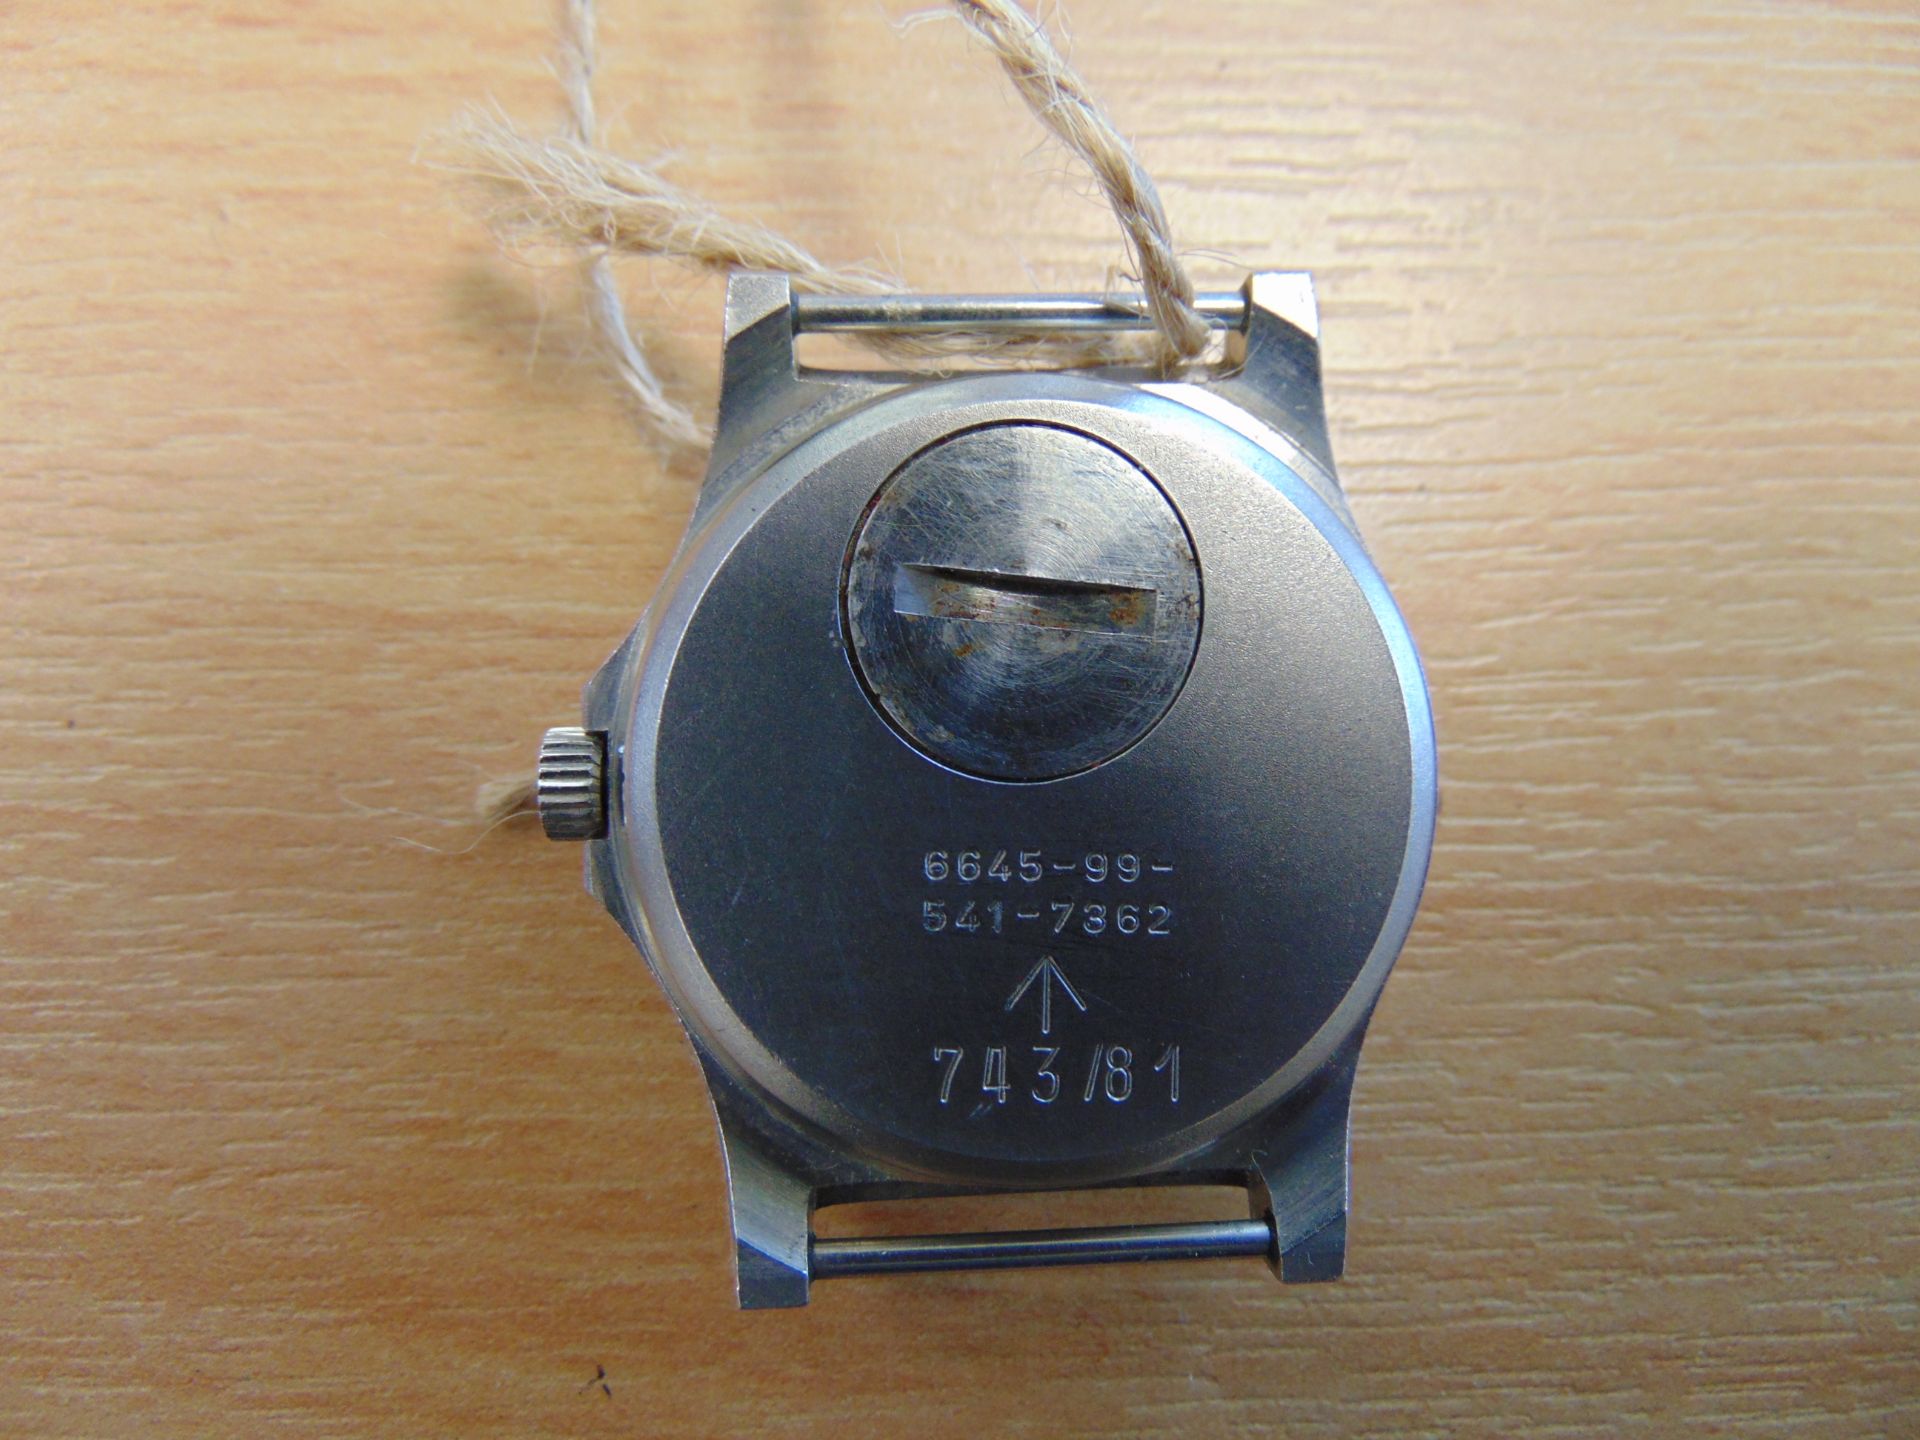 V.Rare CWC (Cabot Watch Co Switzerland), British Army FAT BOY Service Watch with Date Adjust 1981 - Image 4 of 5